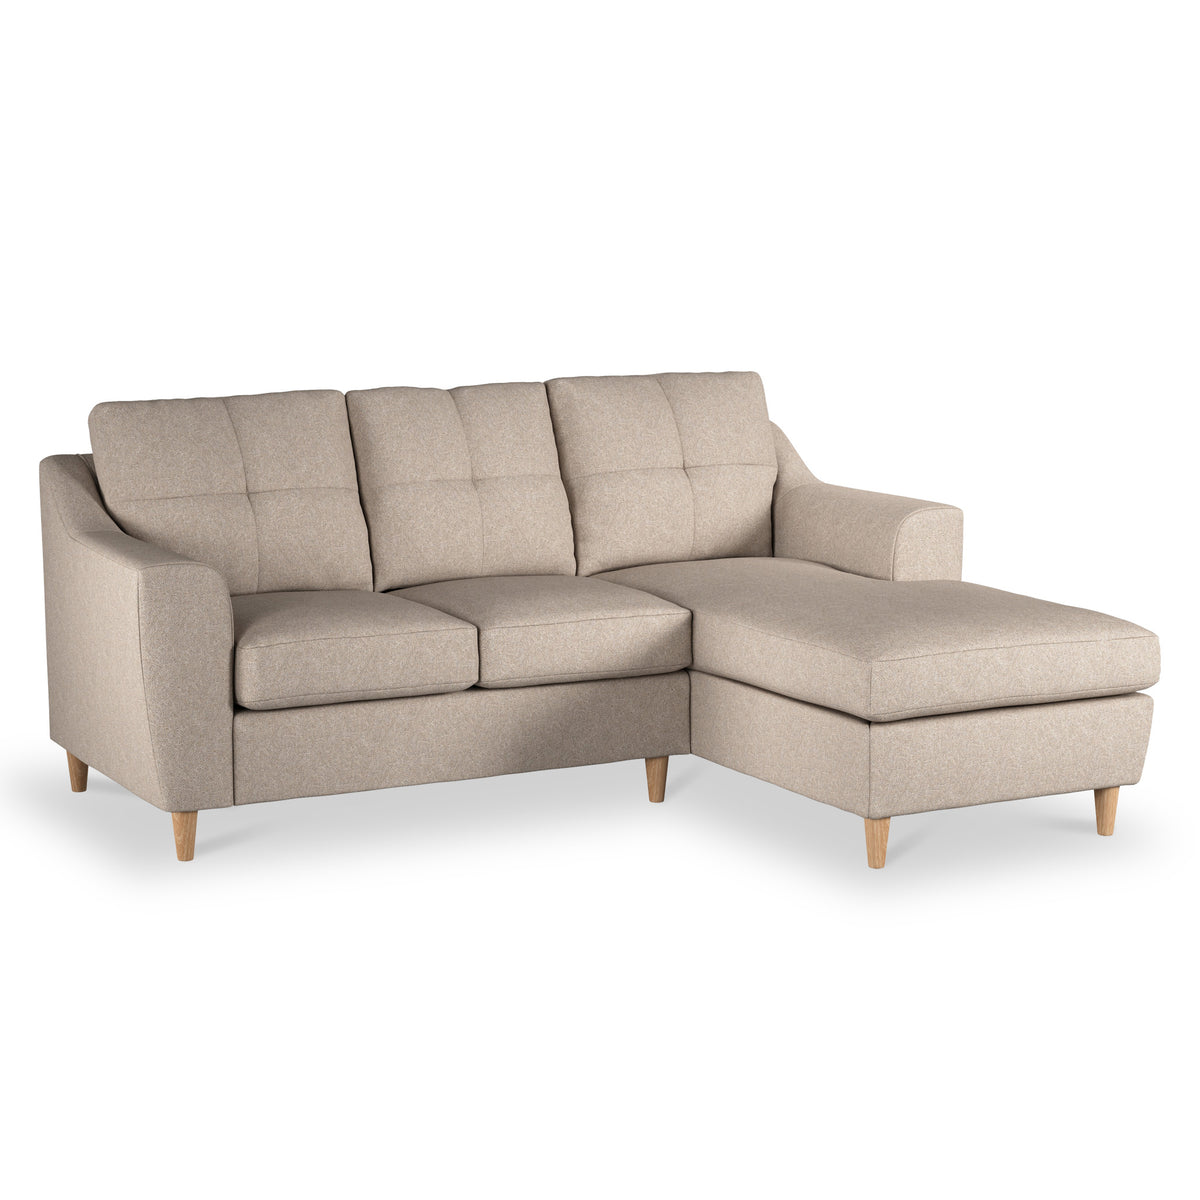 Justin Oatmeal Right Hand Chaise Sofa from Roseland Furniture